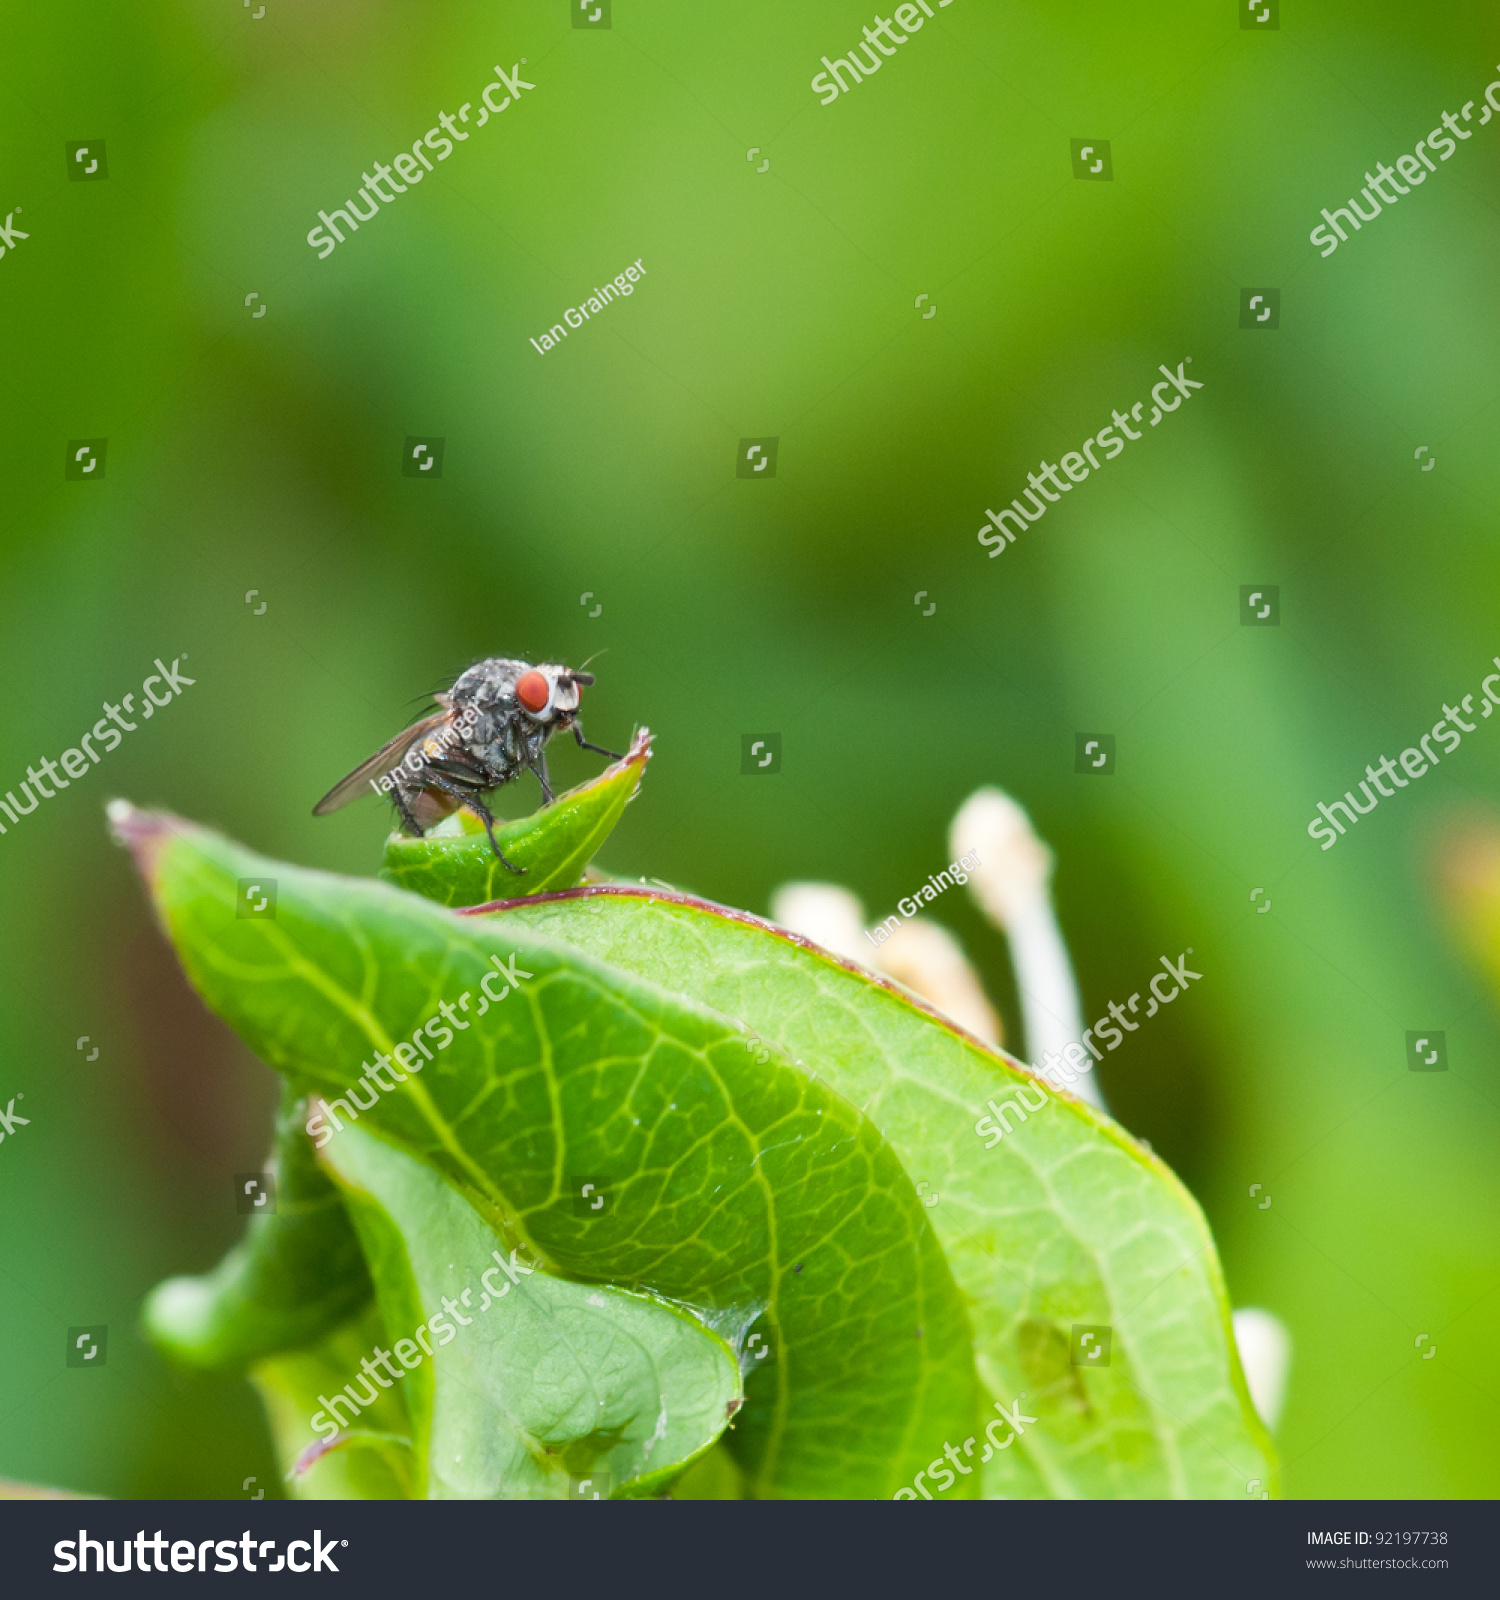 A macro shot of a fly, covered in pollen, sitting on a green leaf. #92197738